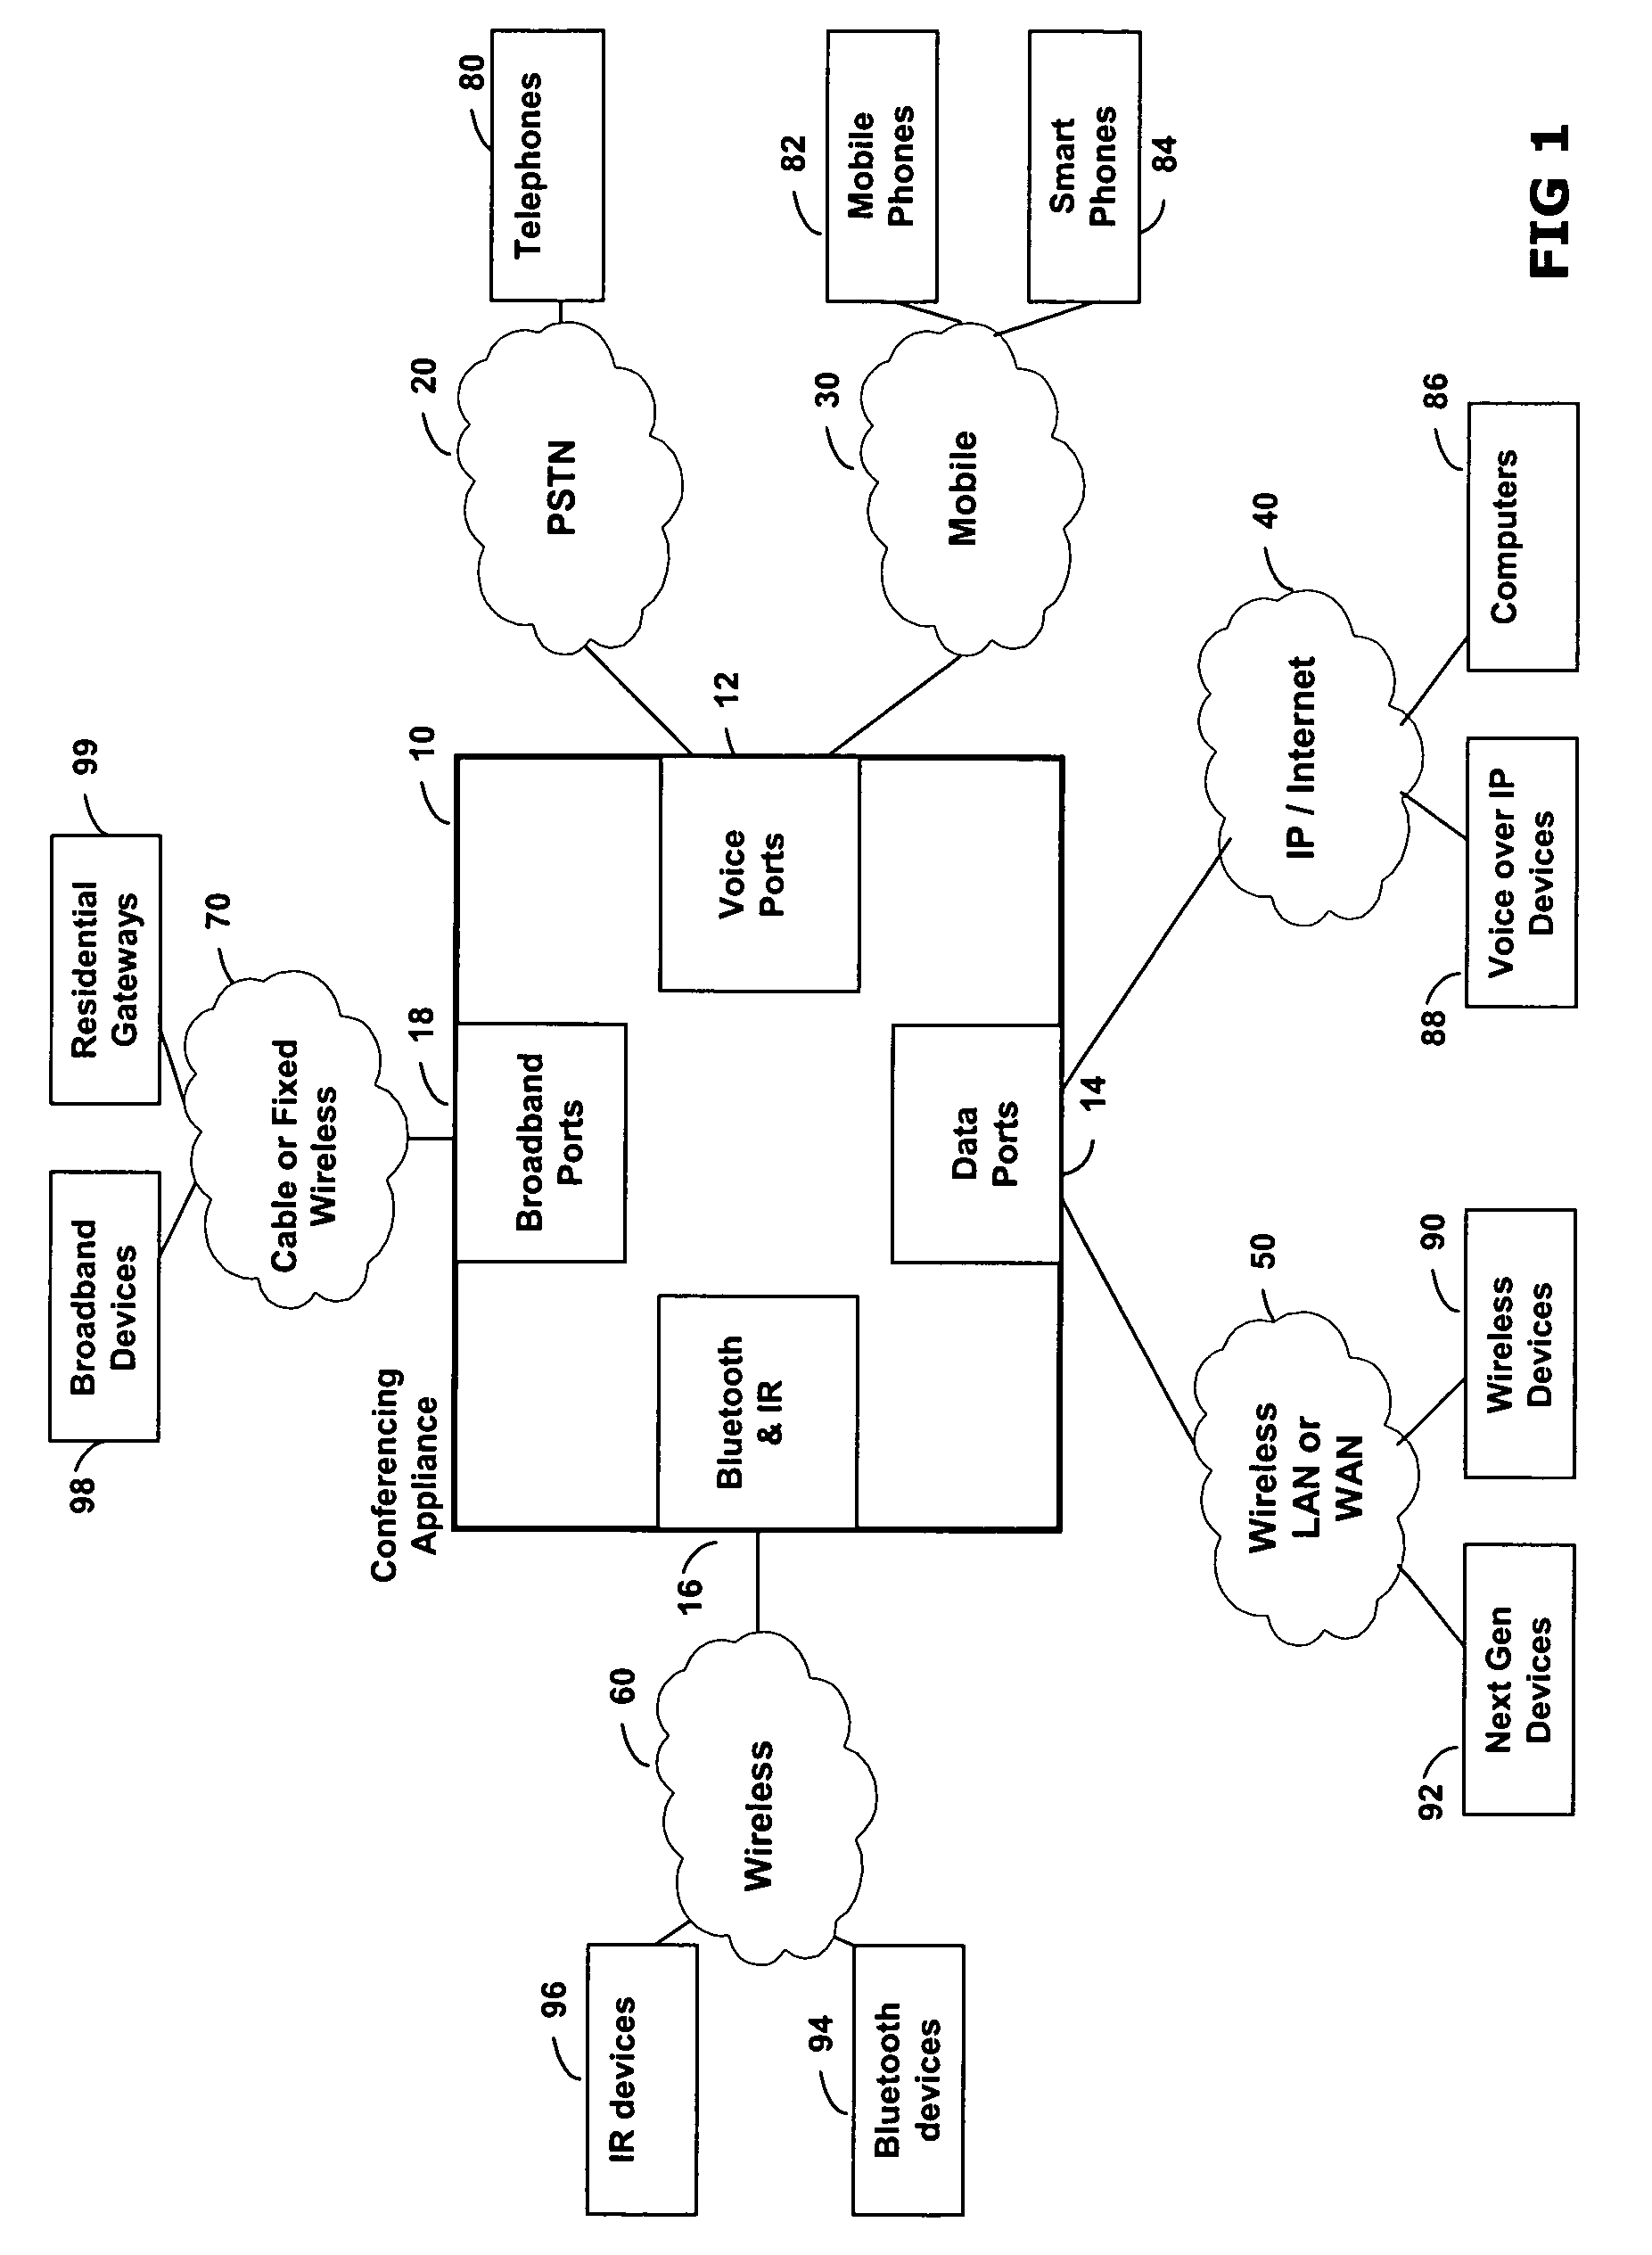 Converged conferencing appliance methods for concurrent voice and data conferencing sessions over networks